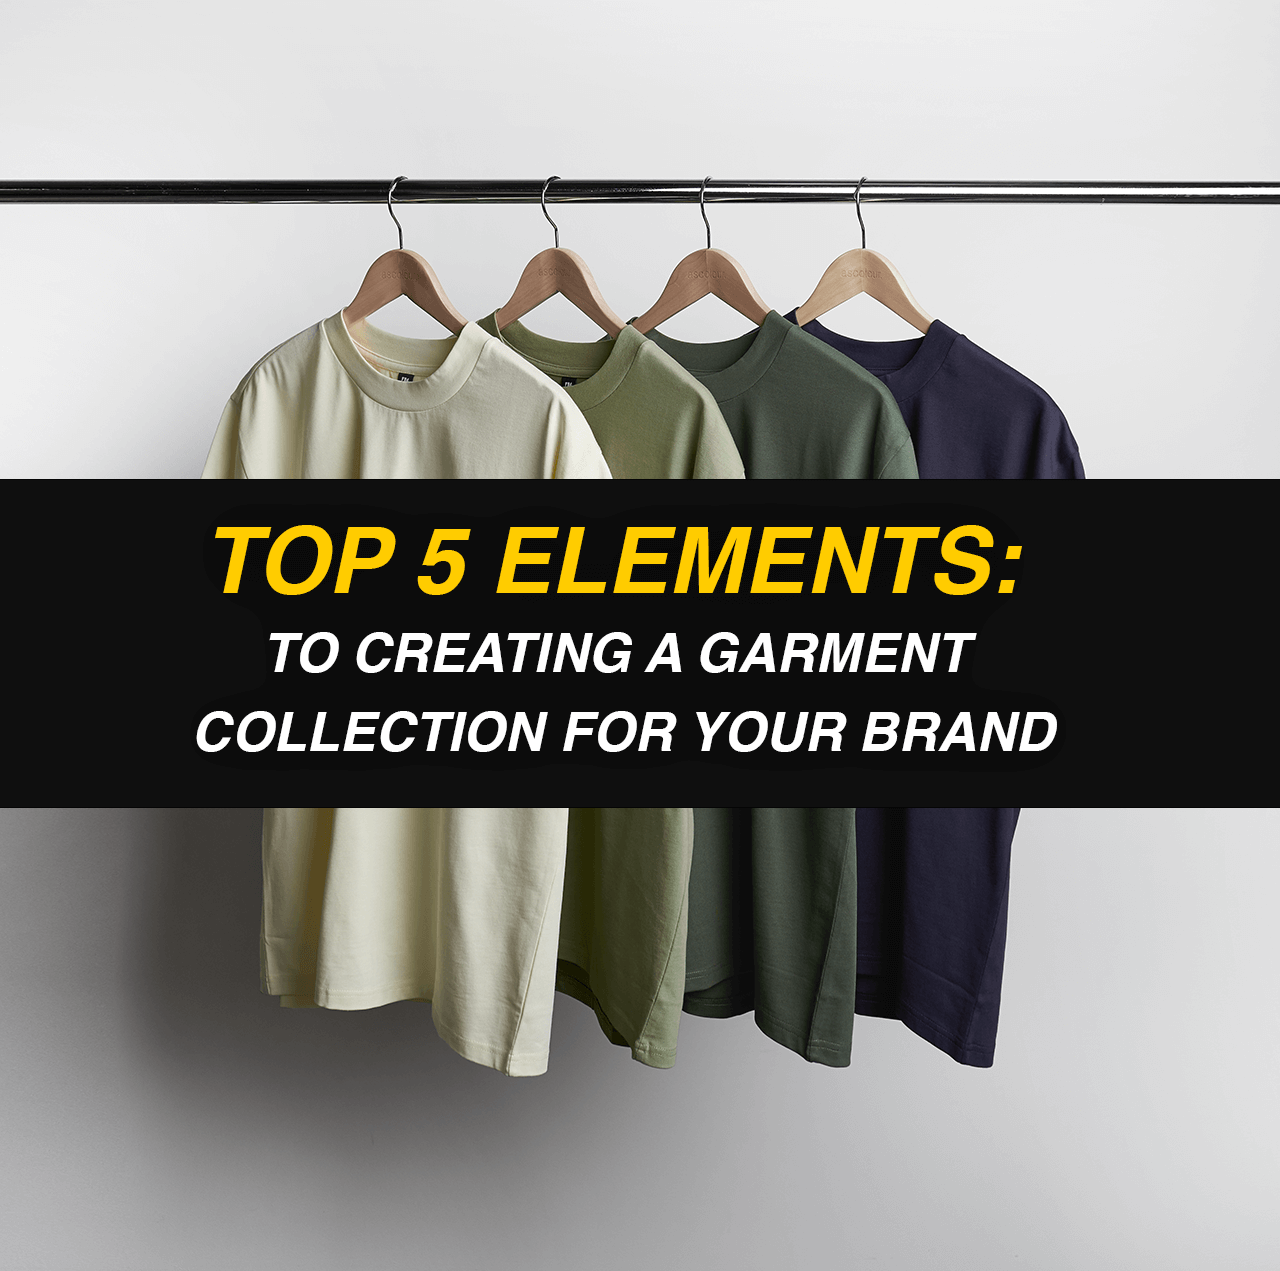 Top 5 elements: to creating a garment collection for your brand